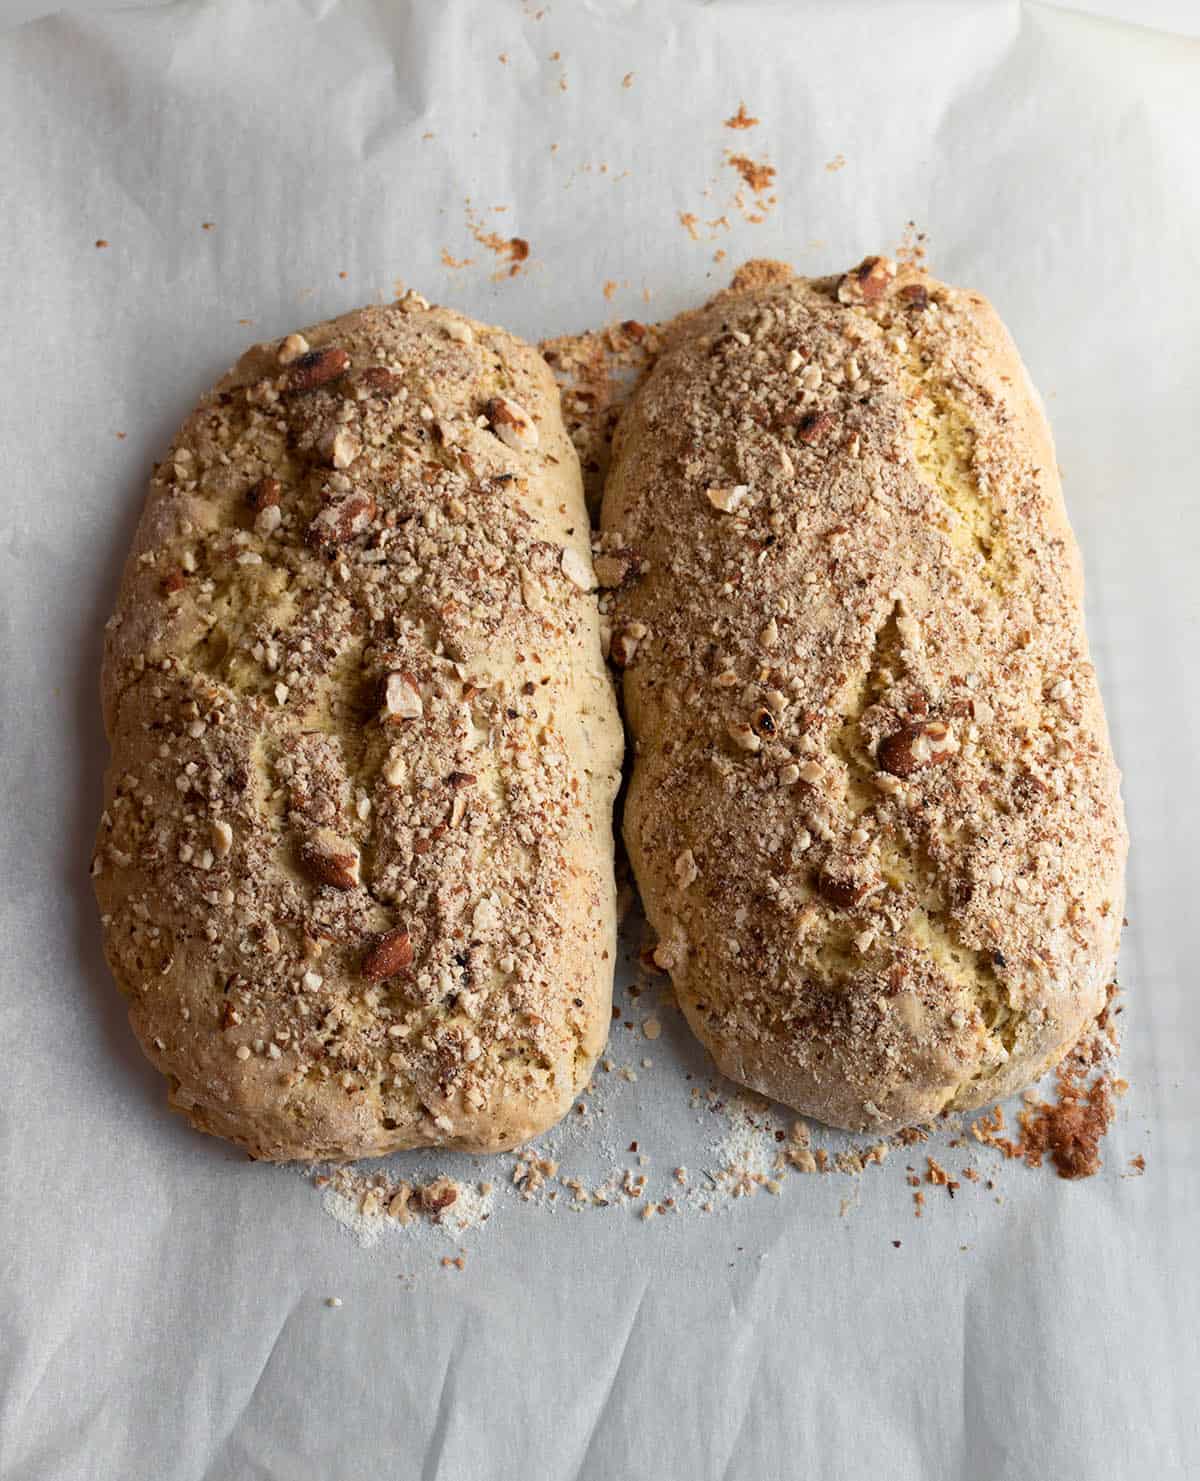 Two freshly baked logs of biscotti with crushed almonds.